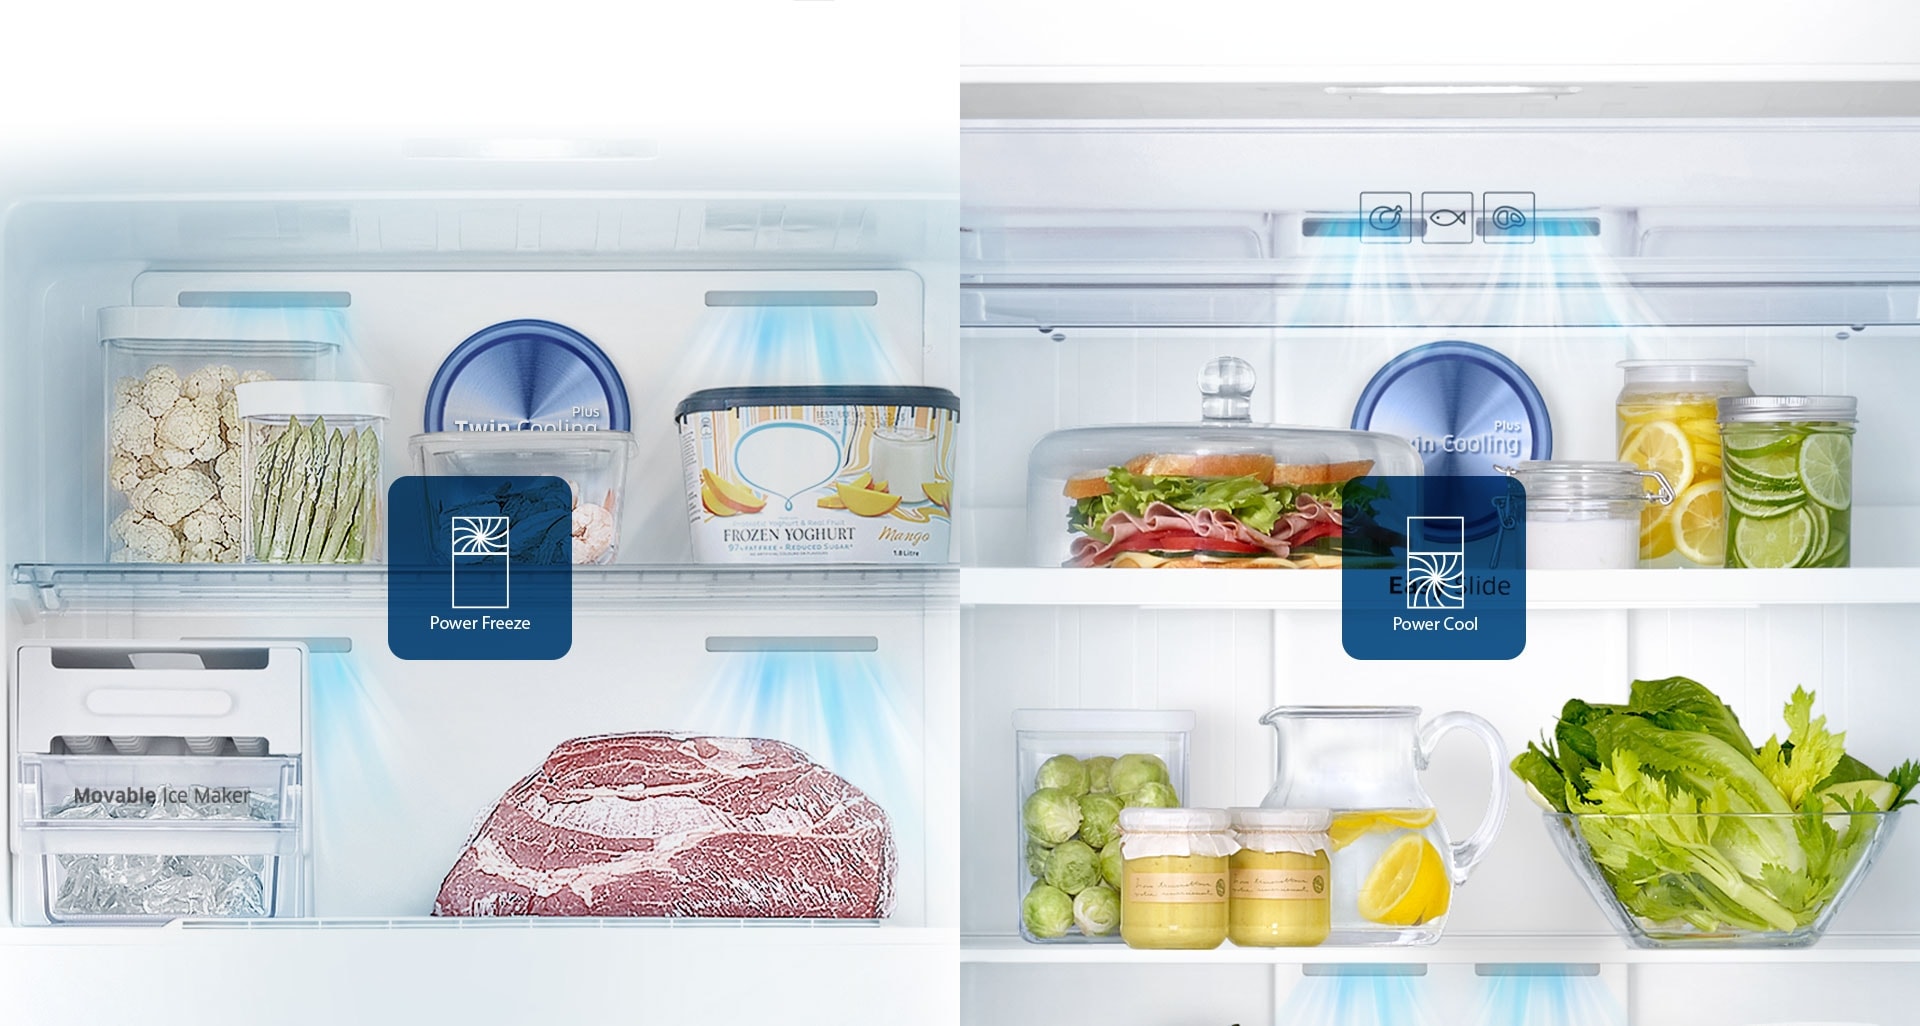 Samsung Twin Cooling Plus Top Freezer Fridge – an image showing Power Cool feature that creates ice and chills beverages rapidly